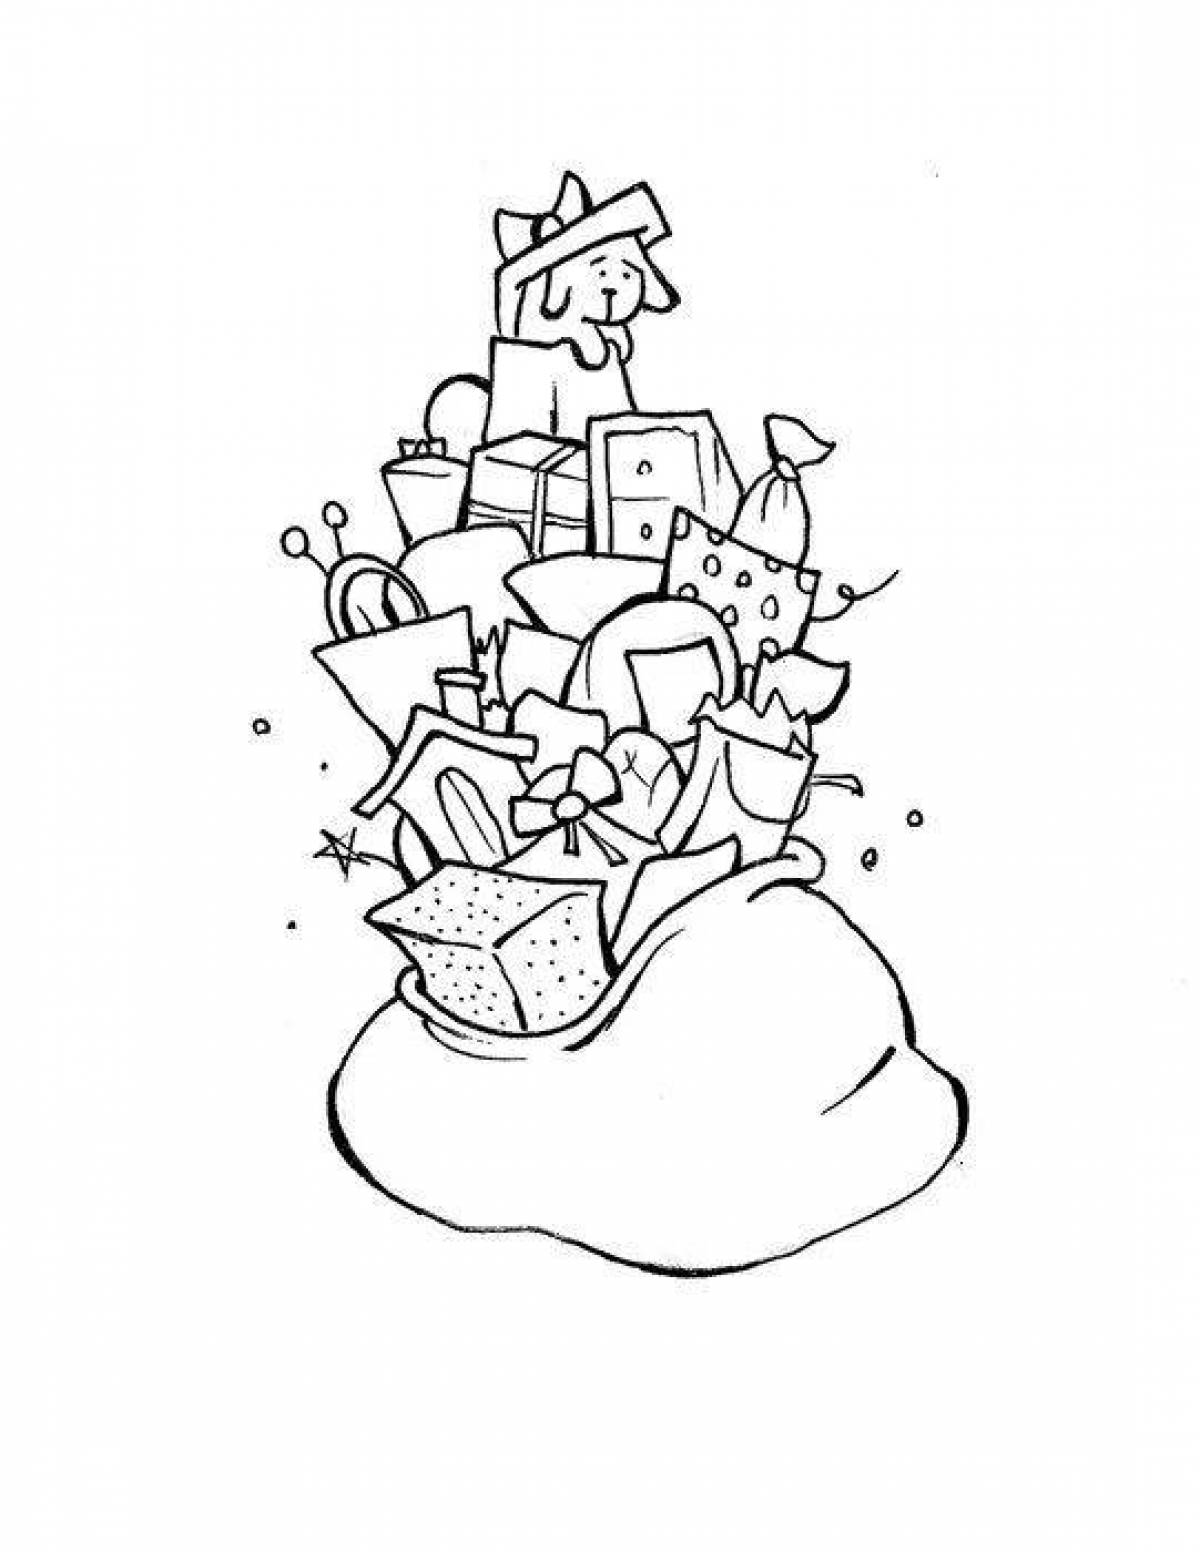 Coloring page joyful bag with gifts